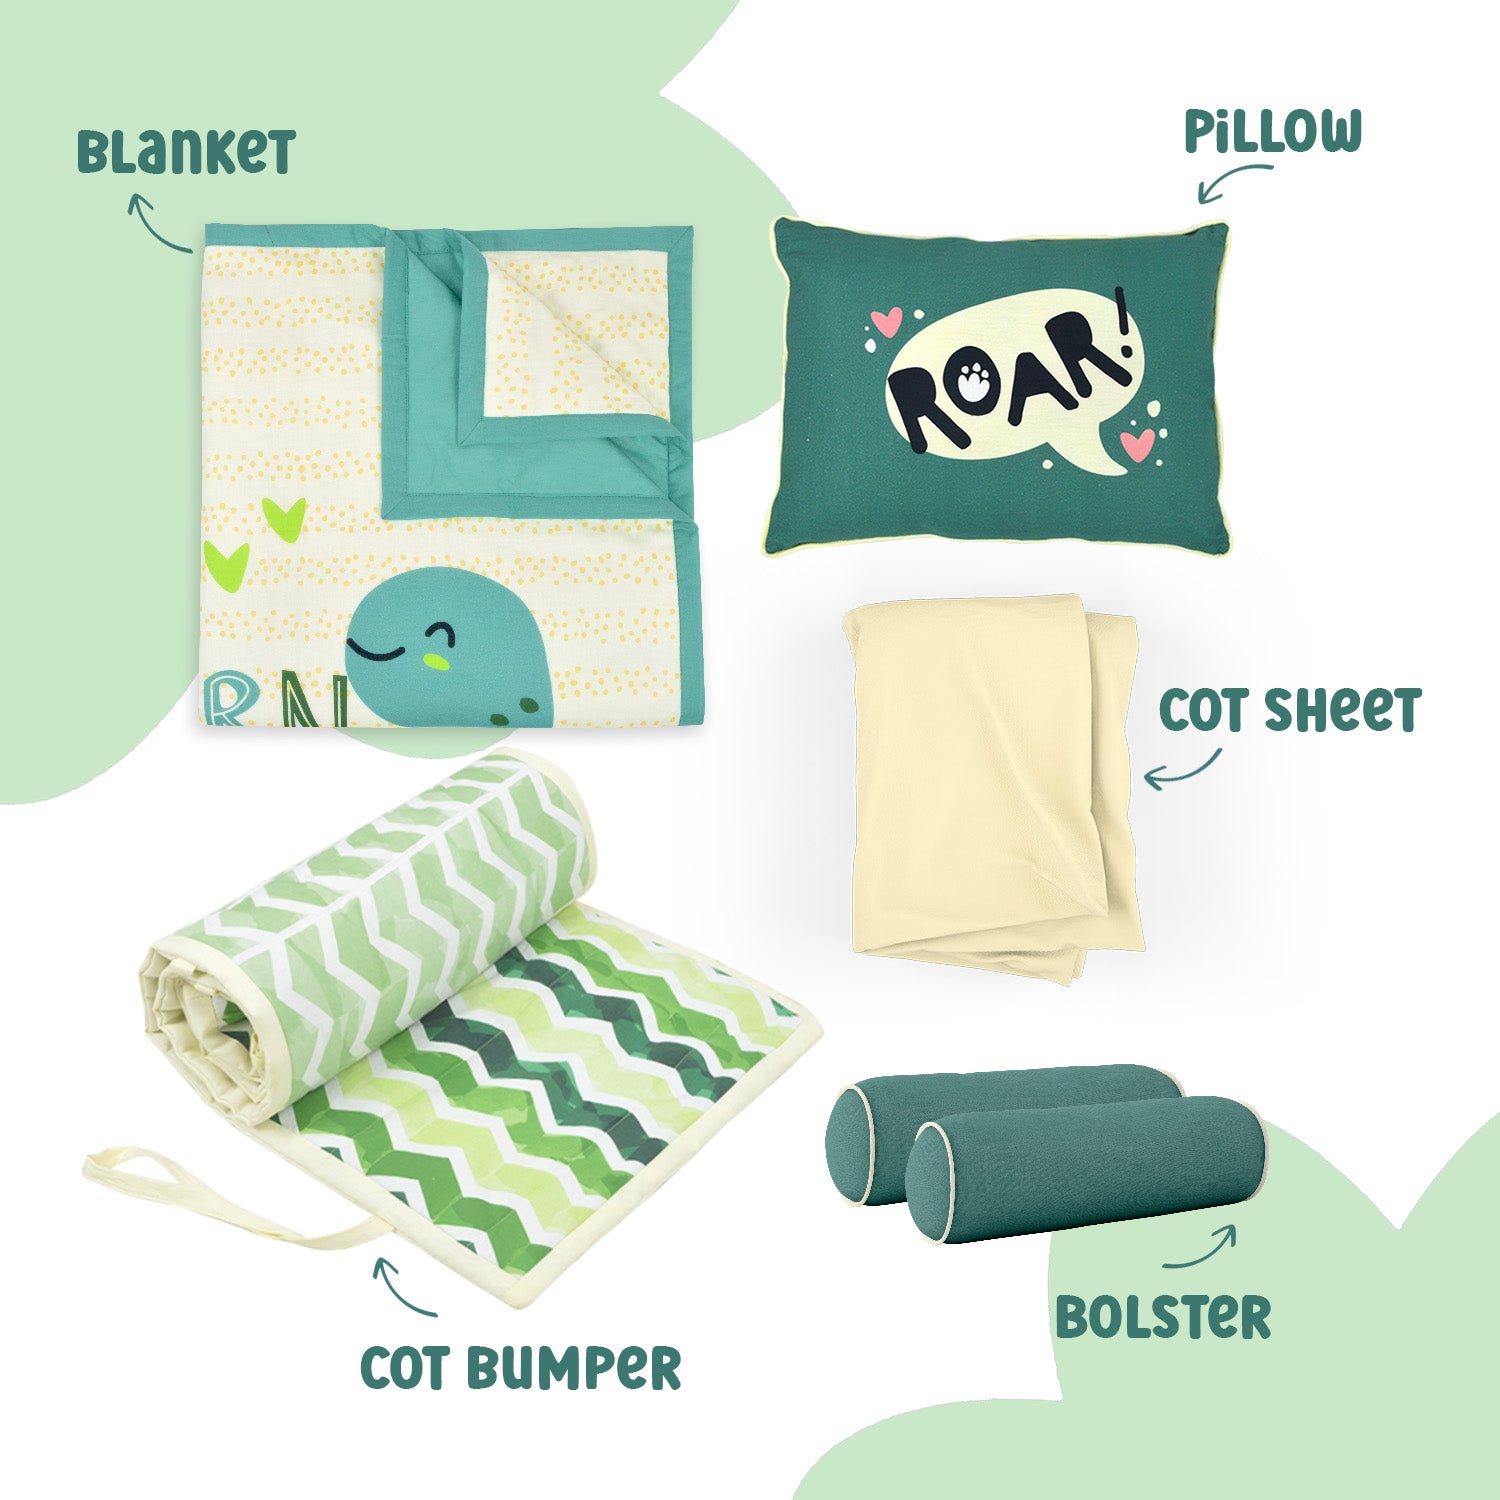 Cotton Crib Set-Complete Baby Bedding Bundle:Blanket, Pillow, Cot Bumper, Bolster, Fitted Sheet (Jurassic Baby)